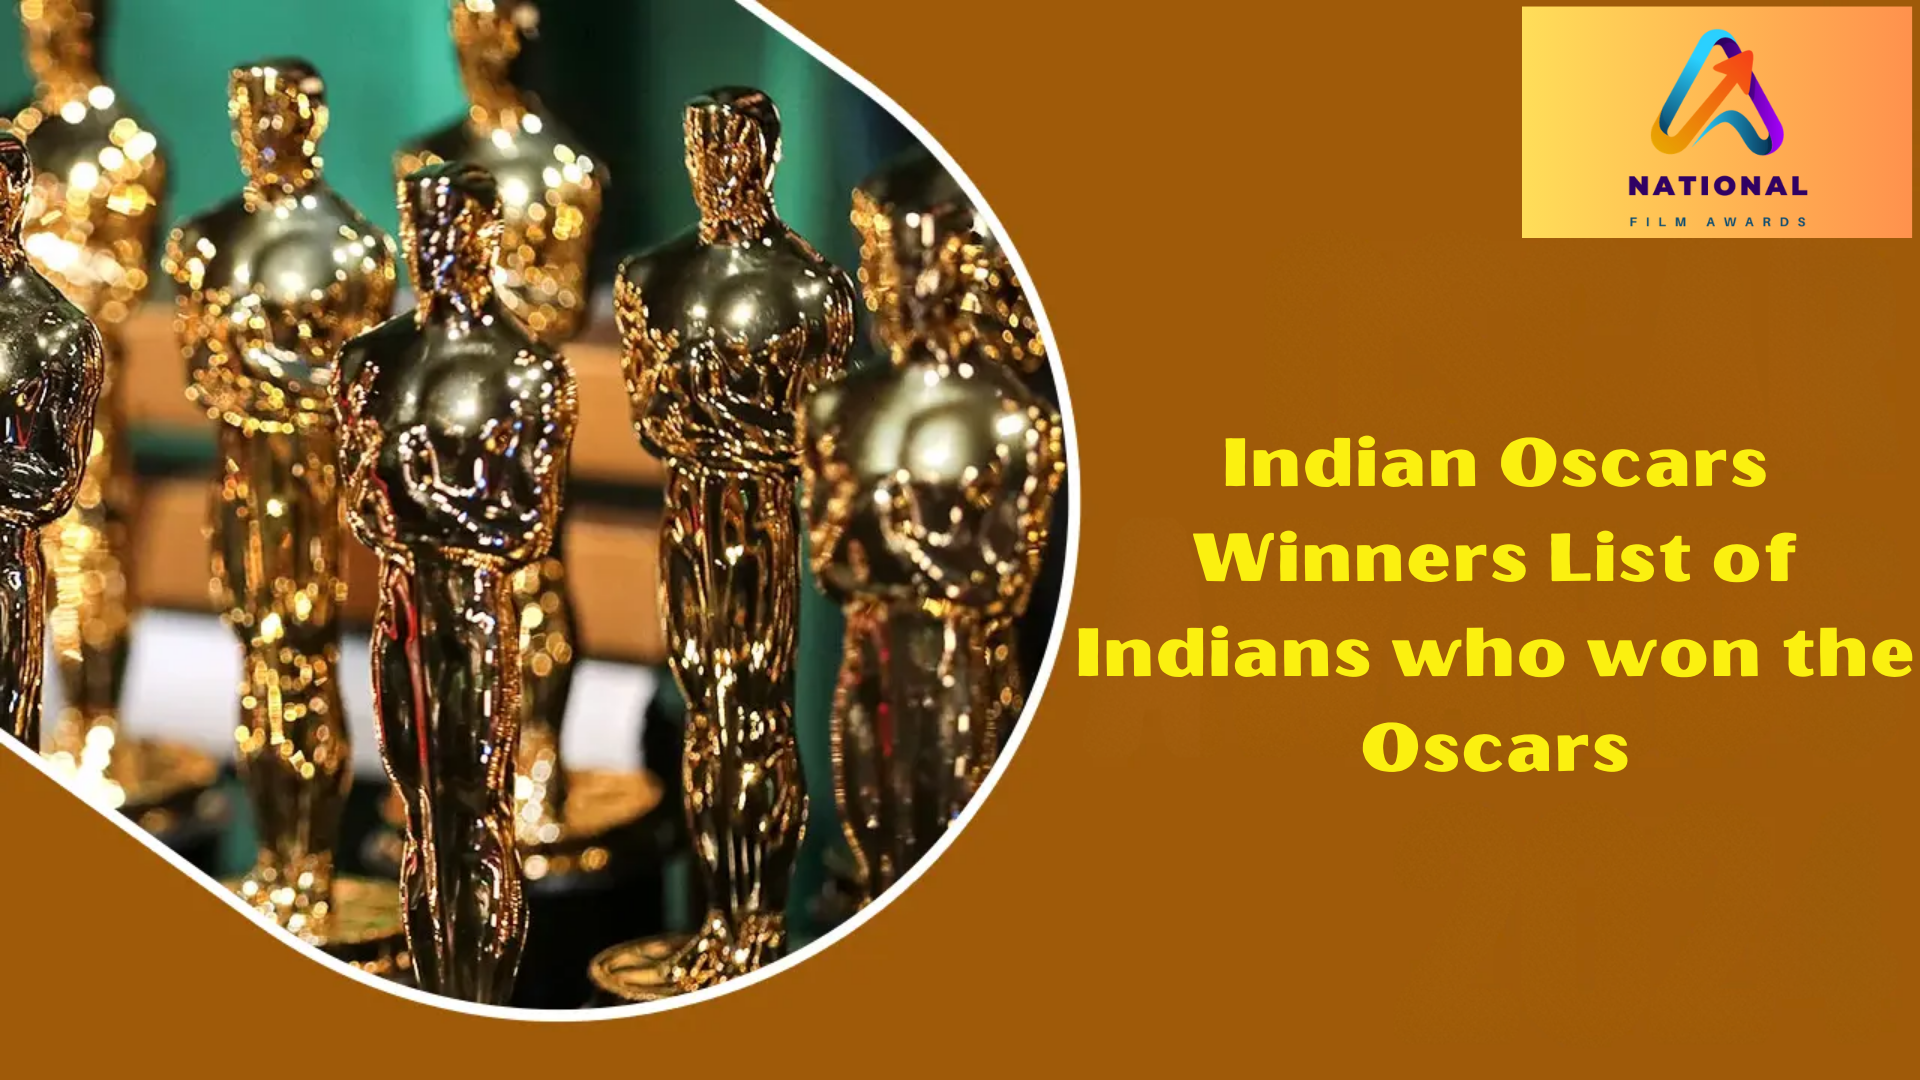 Indian Oscars Winners: List of Indians who won the Oscars (From 1983-2023)